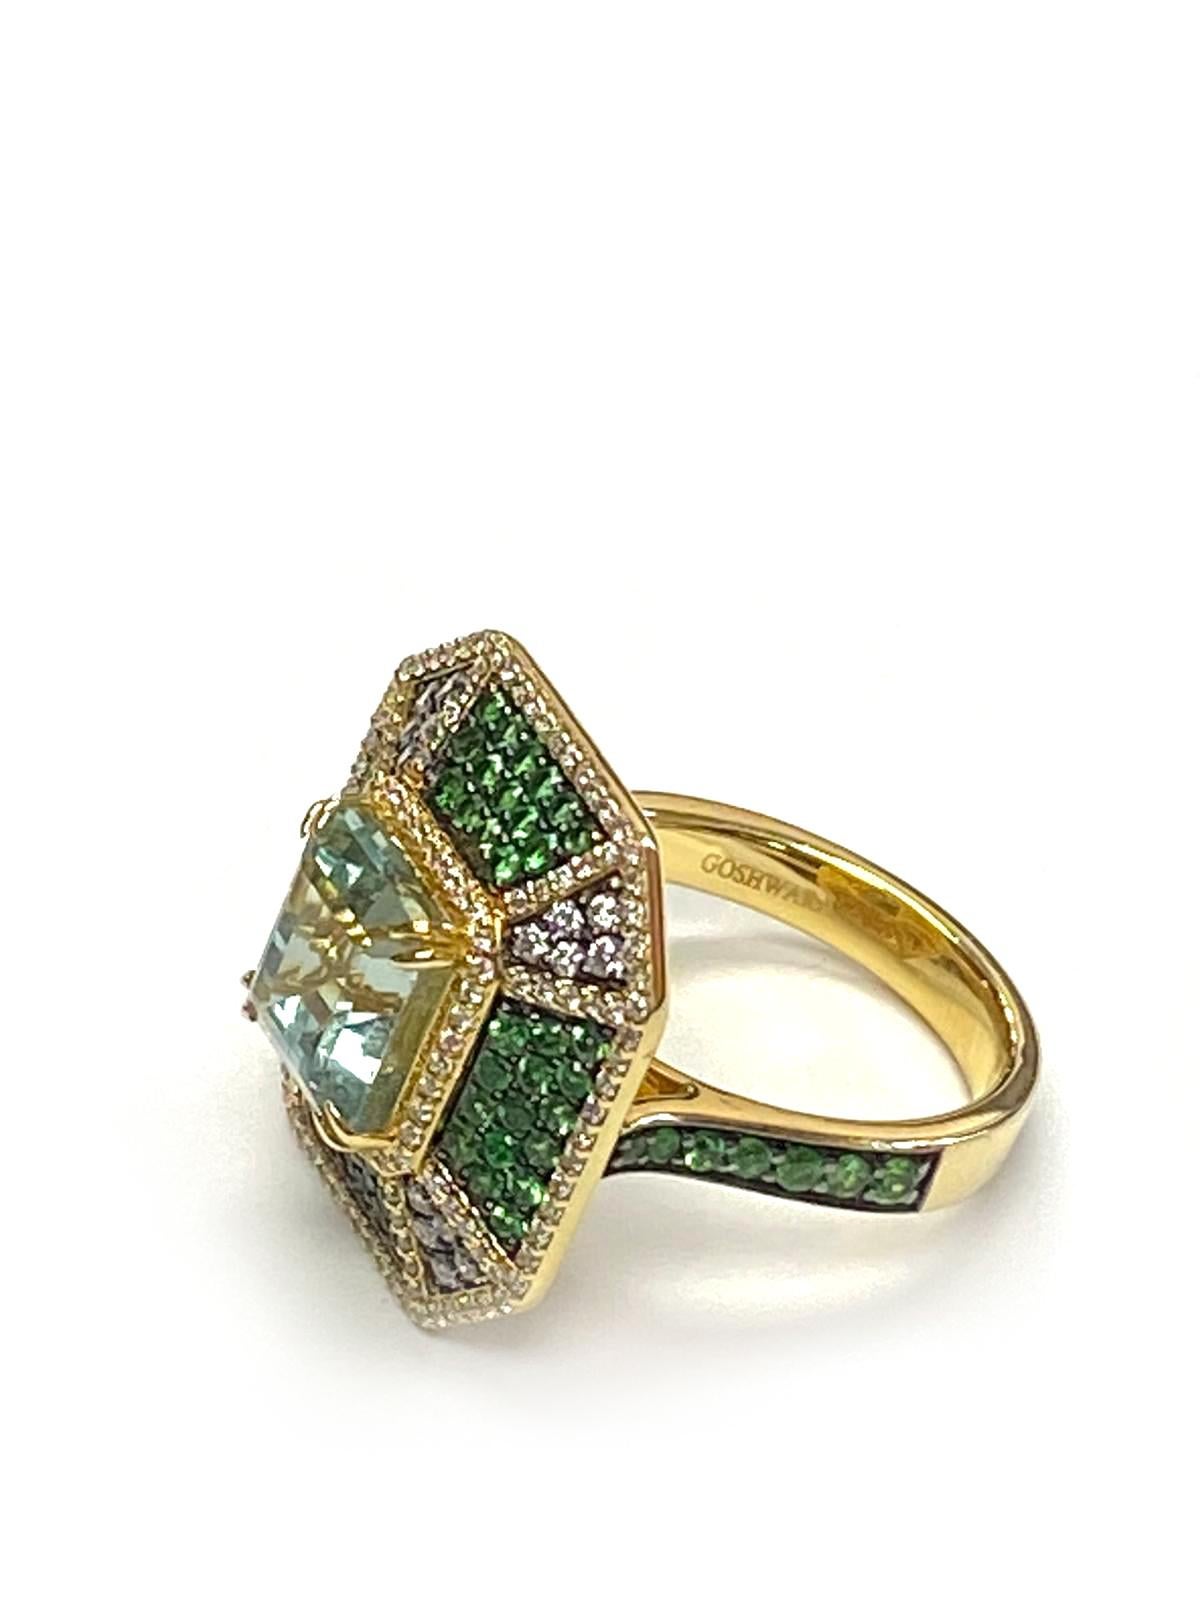 Beryl, Tsavorite & Diamond Octagon Pave Ring, from 'G-one' Collection

Stone Size: 9 x 9 mm

Diamonds: G-H / VS, Approx. Wt: 0.54 Carats